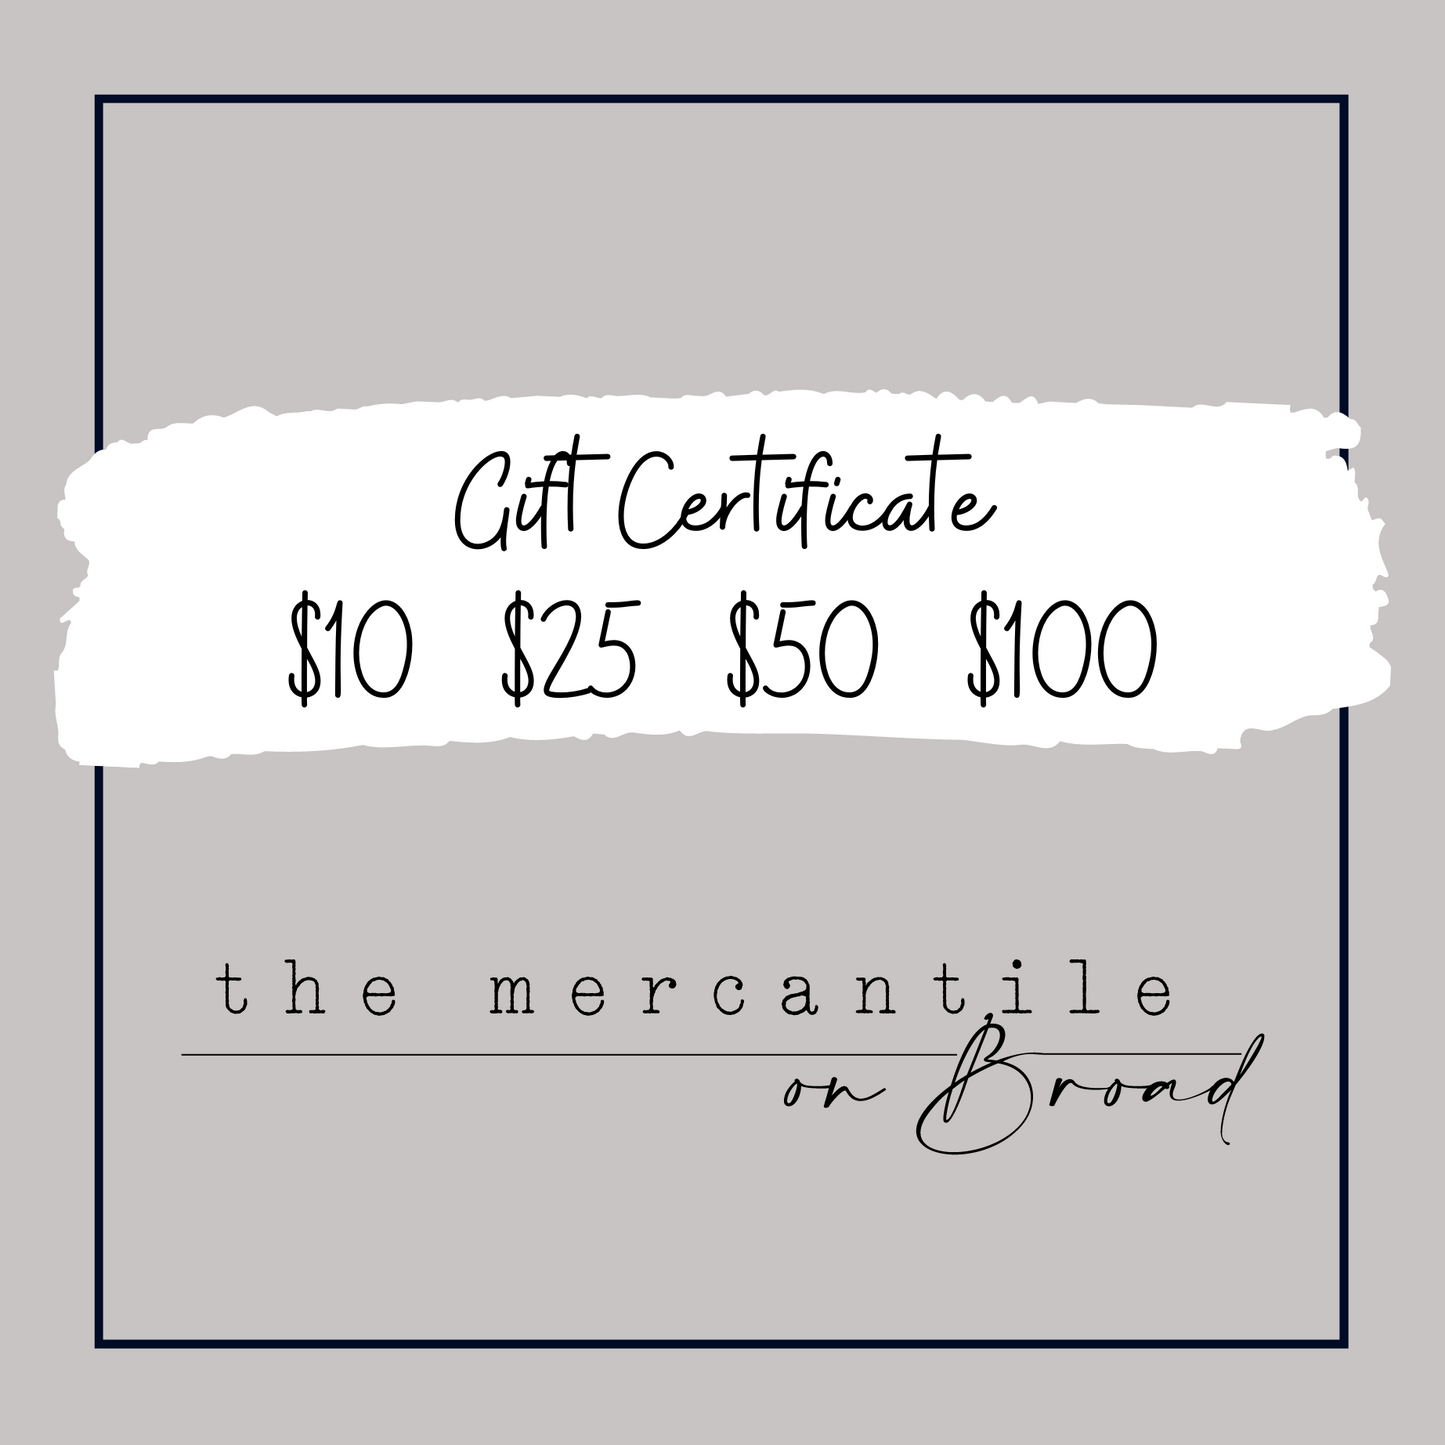 The Mercantile on Broad Gift Card / Certificate